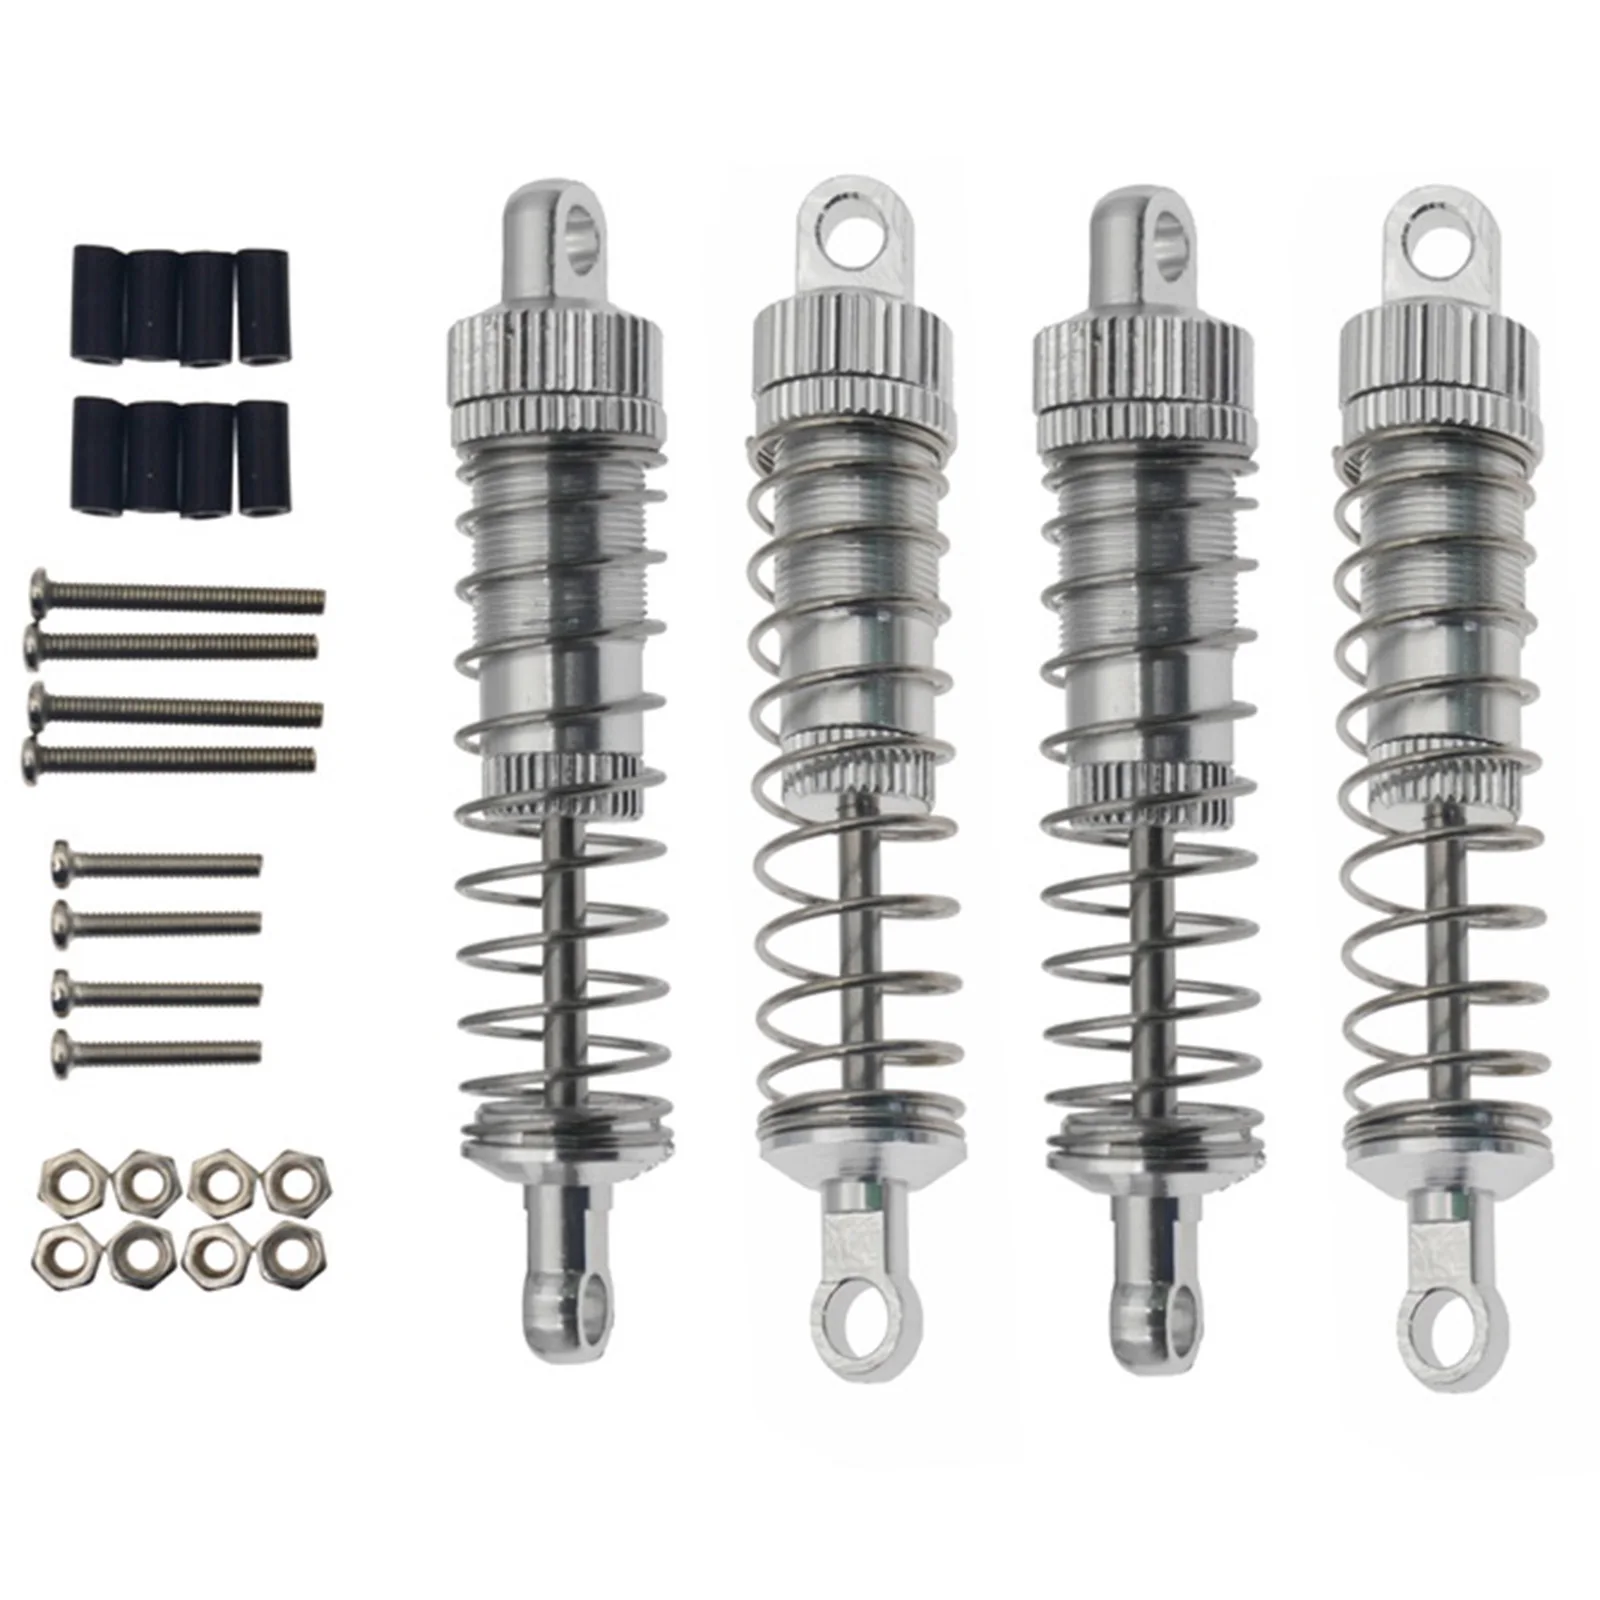 4 Piece Aluminum Shock Absorber Sets Front Rear 65 Mm for RC 1/16 WPL C14 C24 MN90